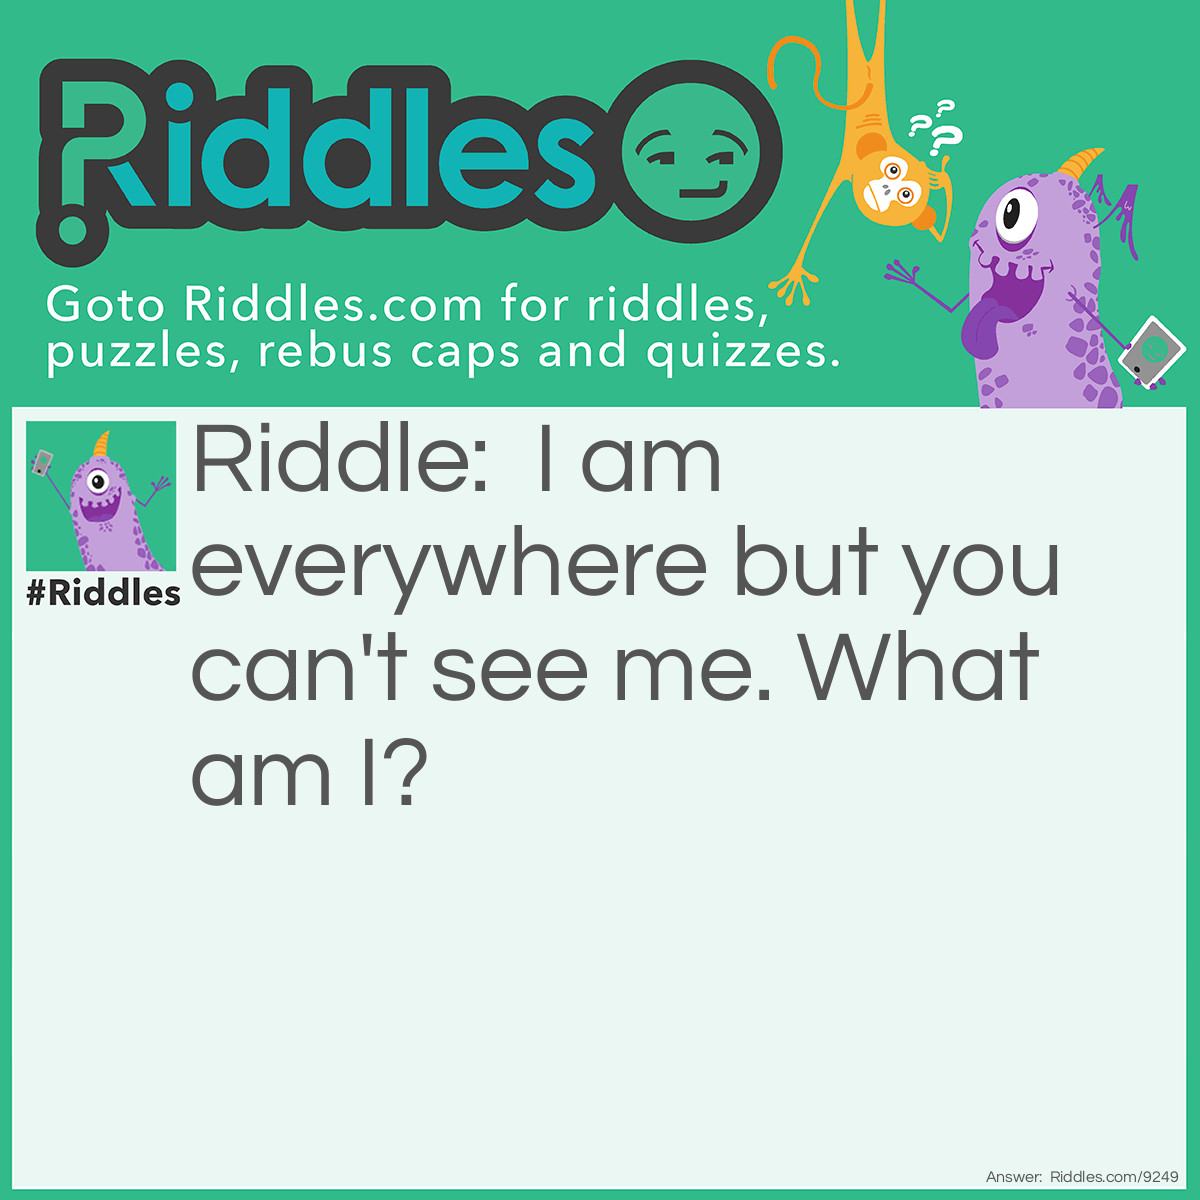 Riddle: I am everywhere but you can't see me. What am I? Answer: An atom.